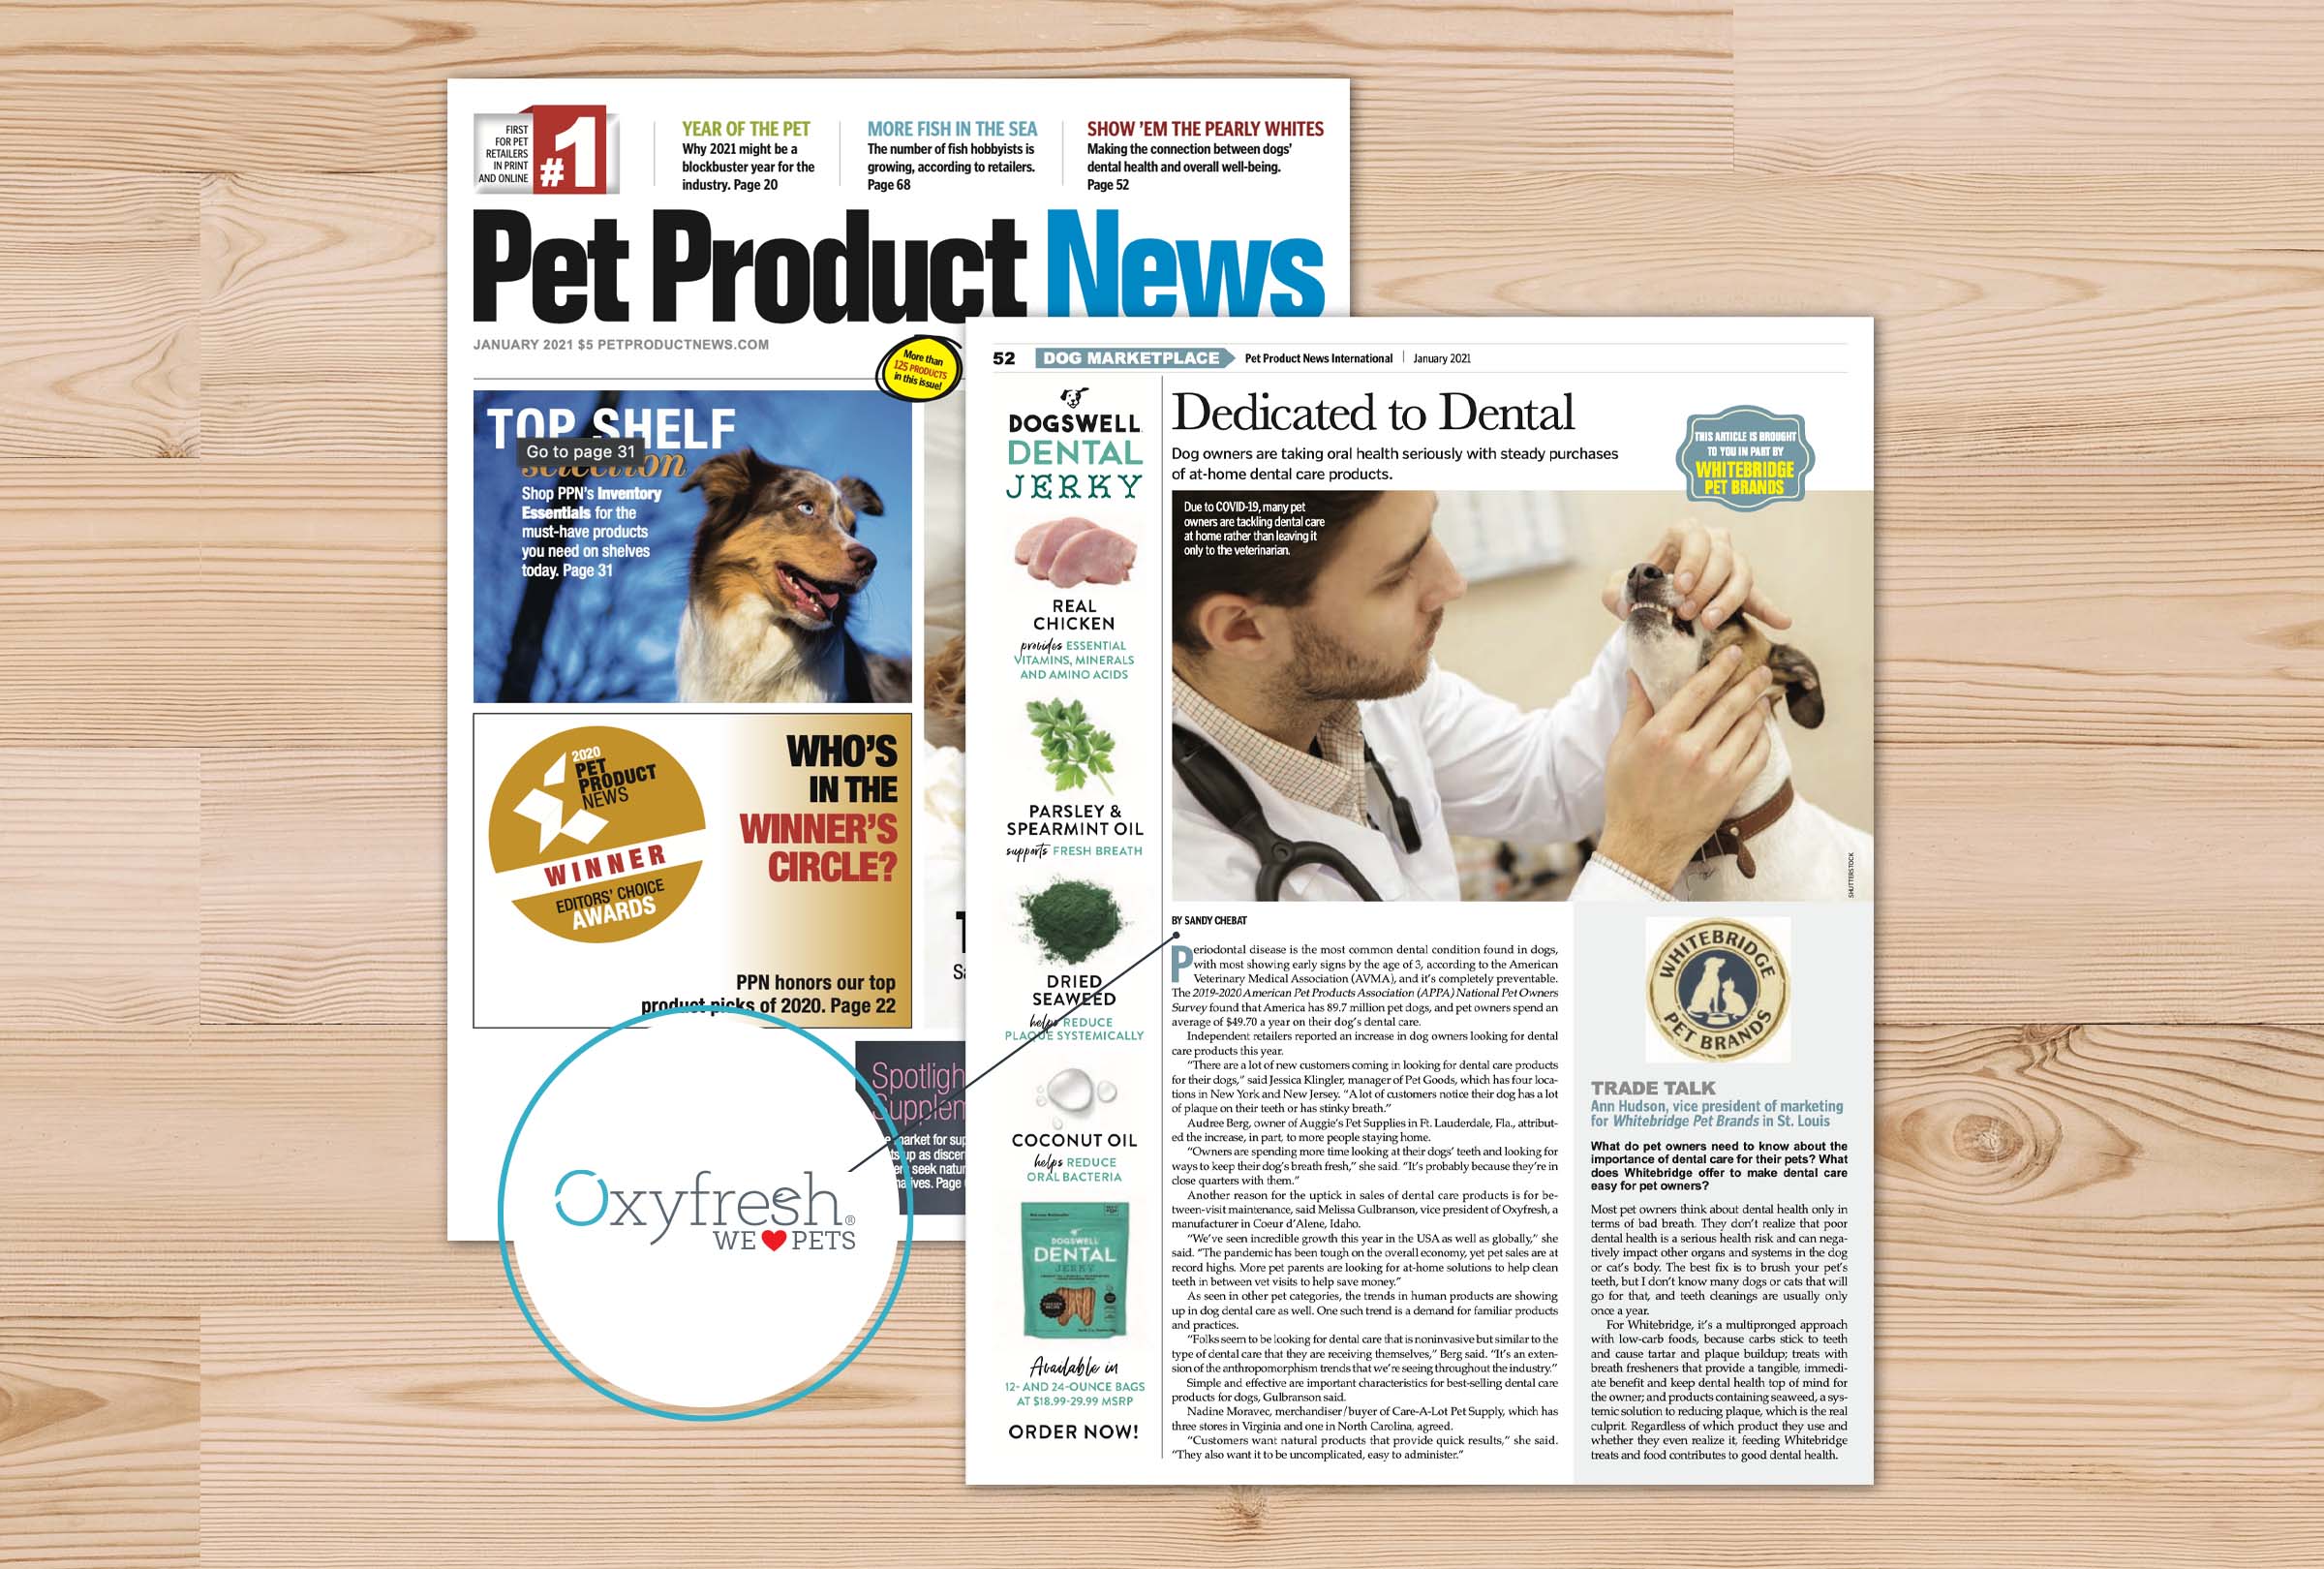 Oxyfresh Featured in January 2021 issue of Pet Product News